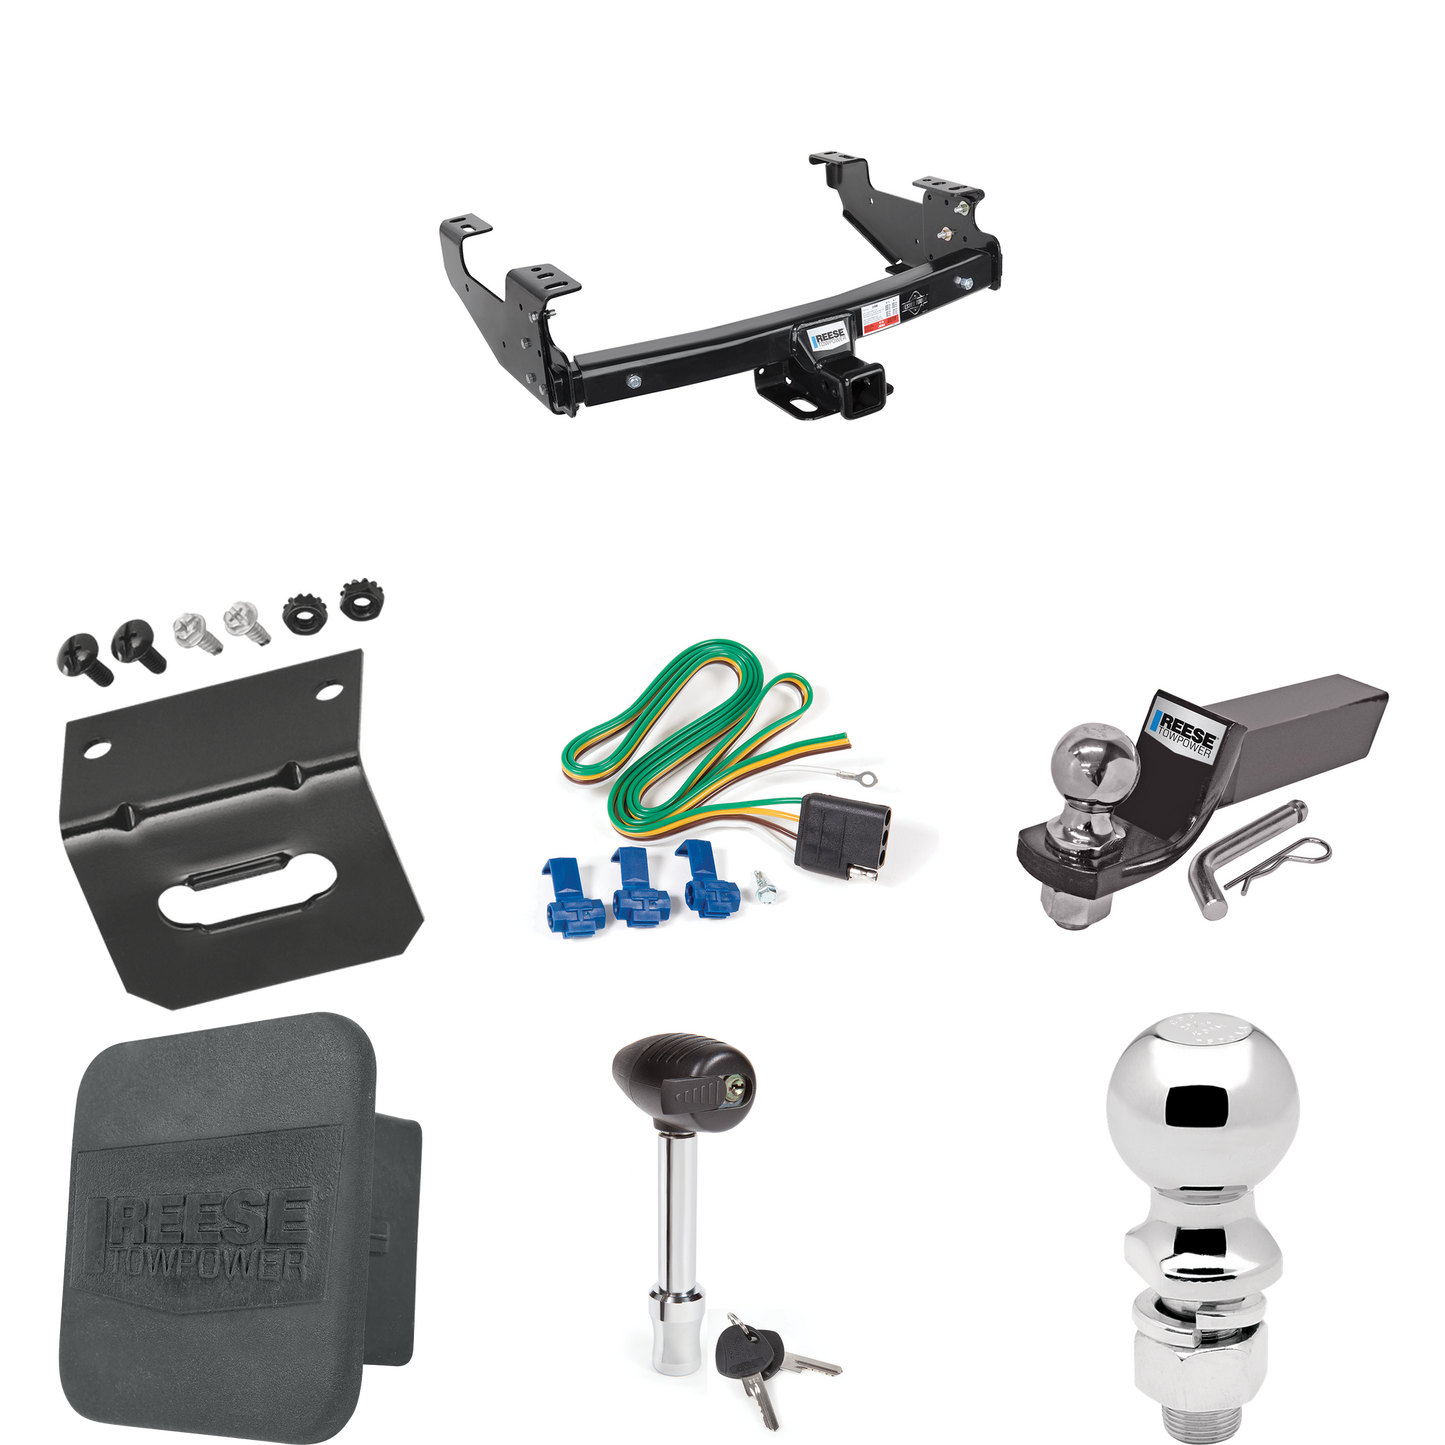 Fits 1988-2000 GMC C/K Series Trailer Hitch Tow PKG w/ 4-Flat Wiring + Starter Kit Ball Mount w/ 2" Drop & 2" Ball + 2-5/16" Ball + Wiring Bracket + Hitch Lock + Hitch Cover (For 2 Dr. Regular & Extended Cabs w/8 ft. Bed Models) By Reese Towpower